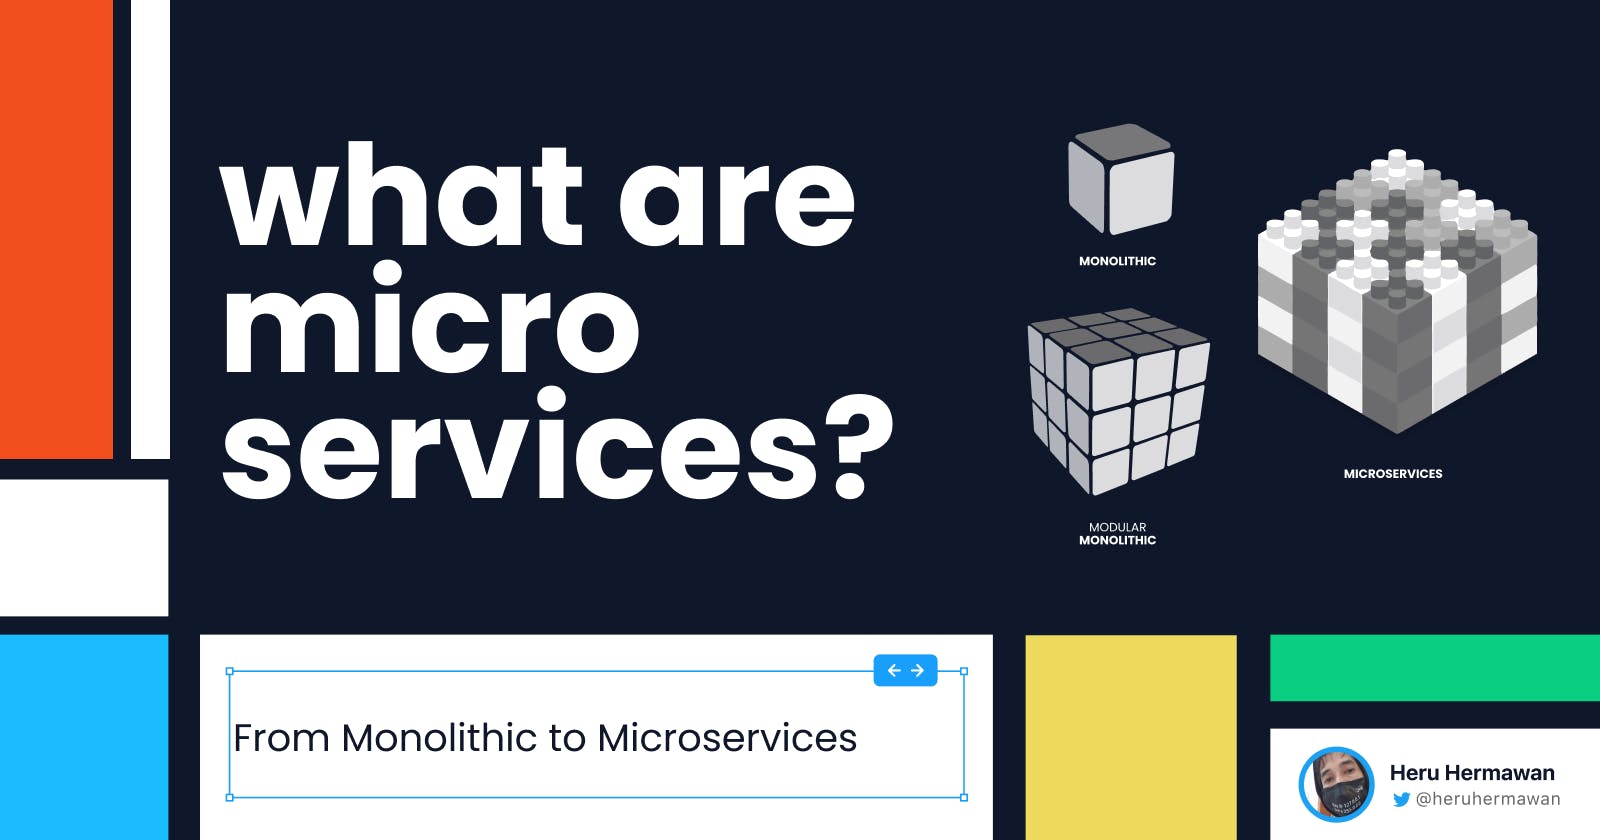 From Monolithic to Microservices: What Are Microservices?